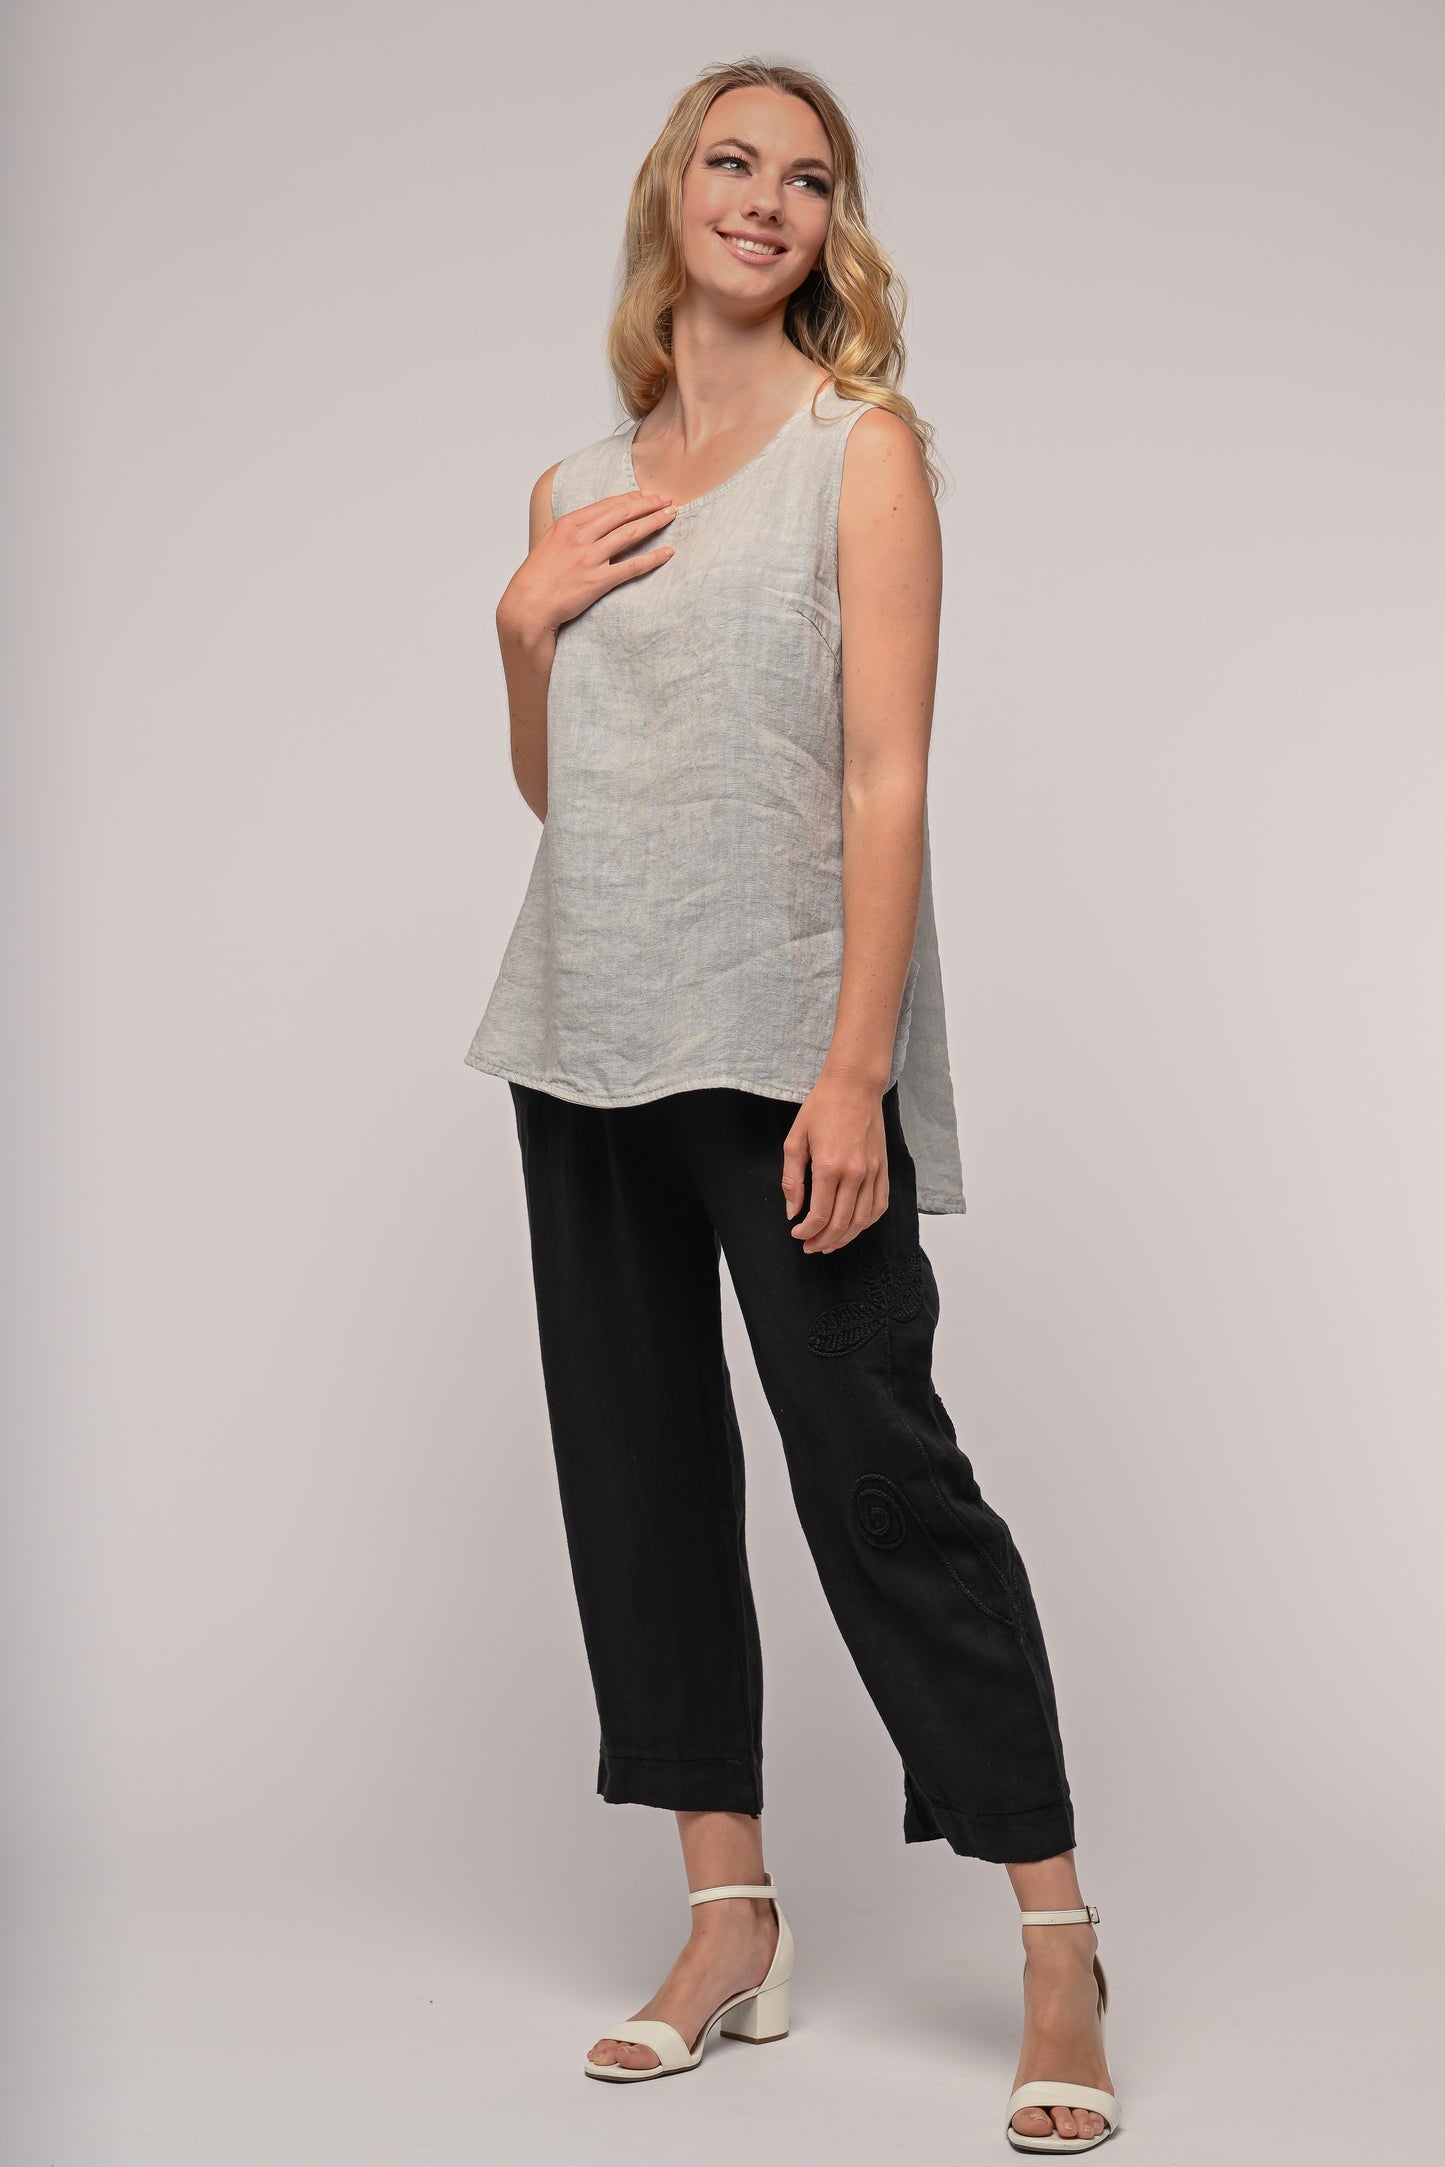 LINEN LUV French Linen Tank TP1131